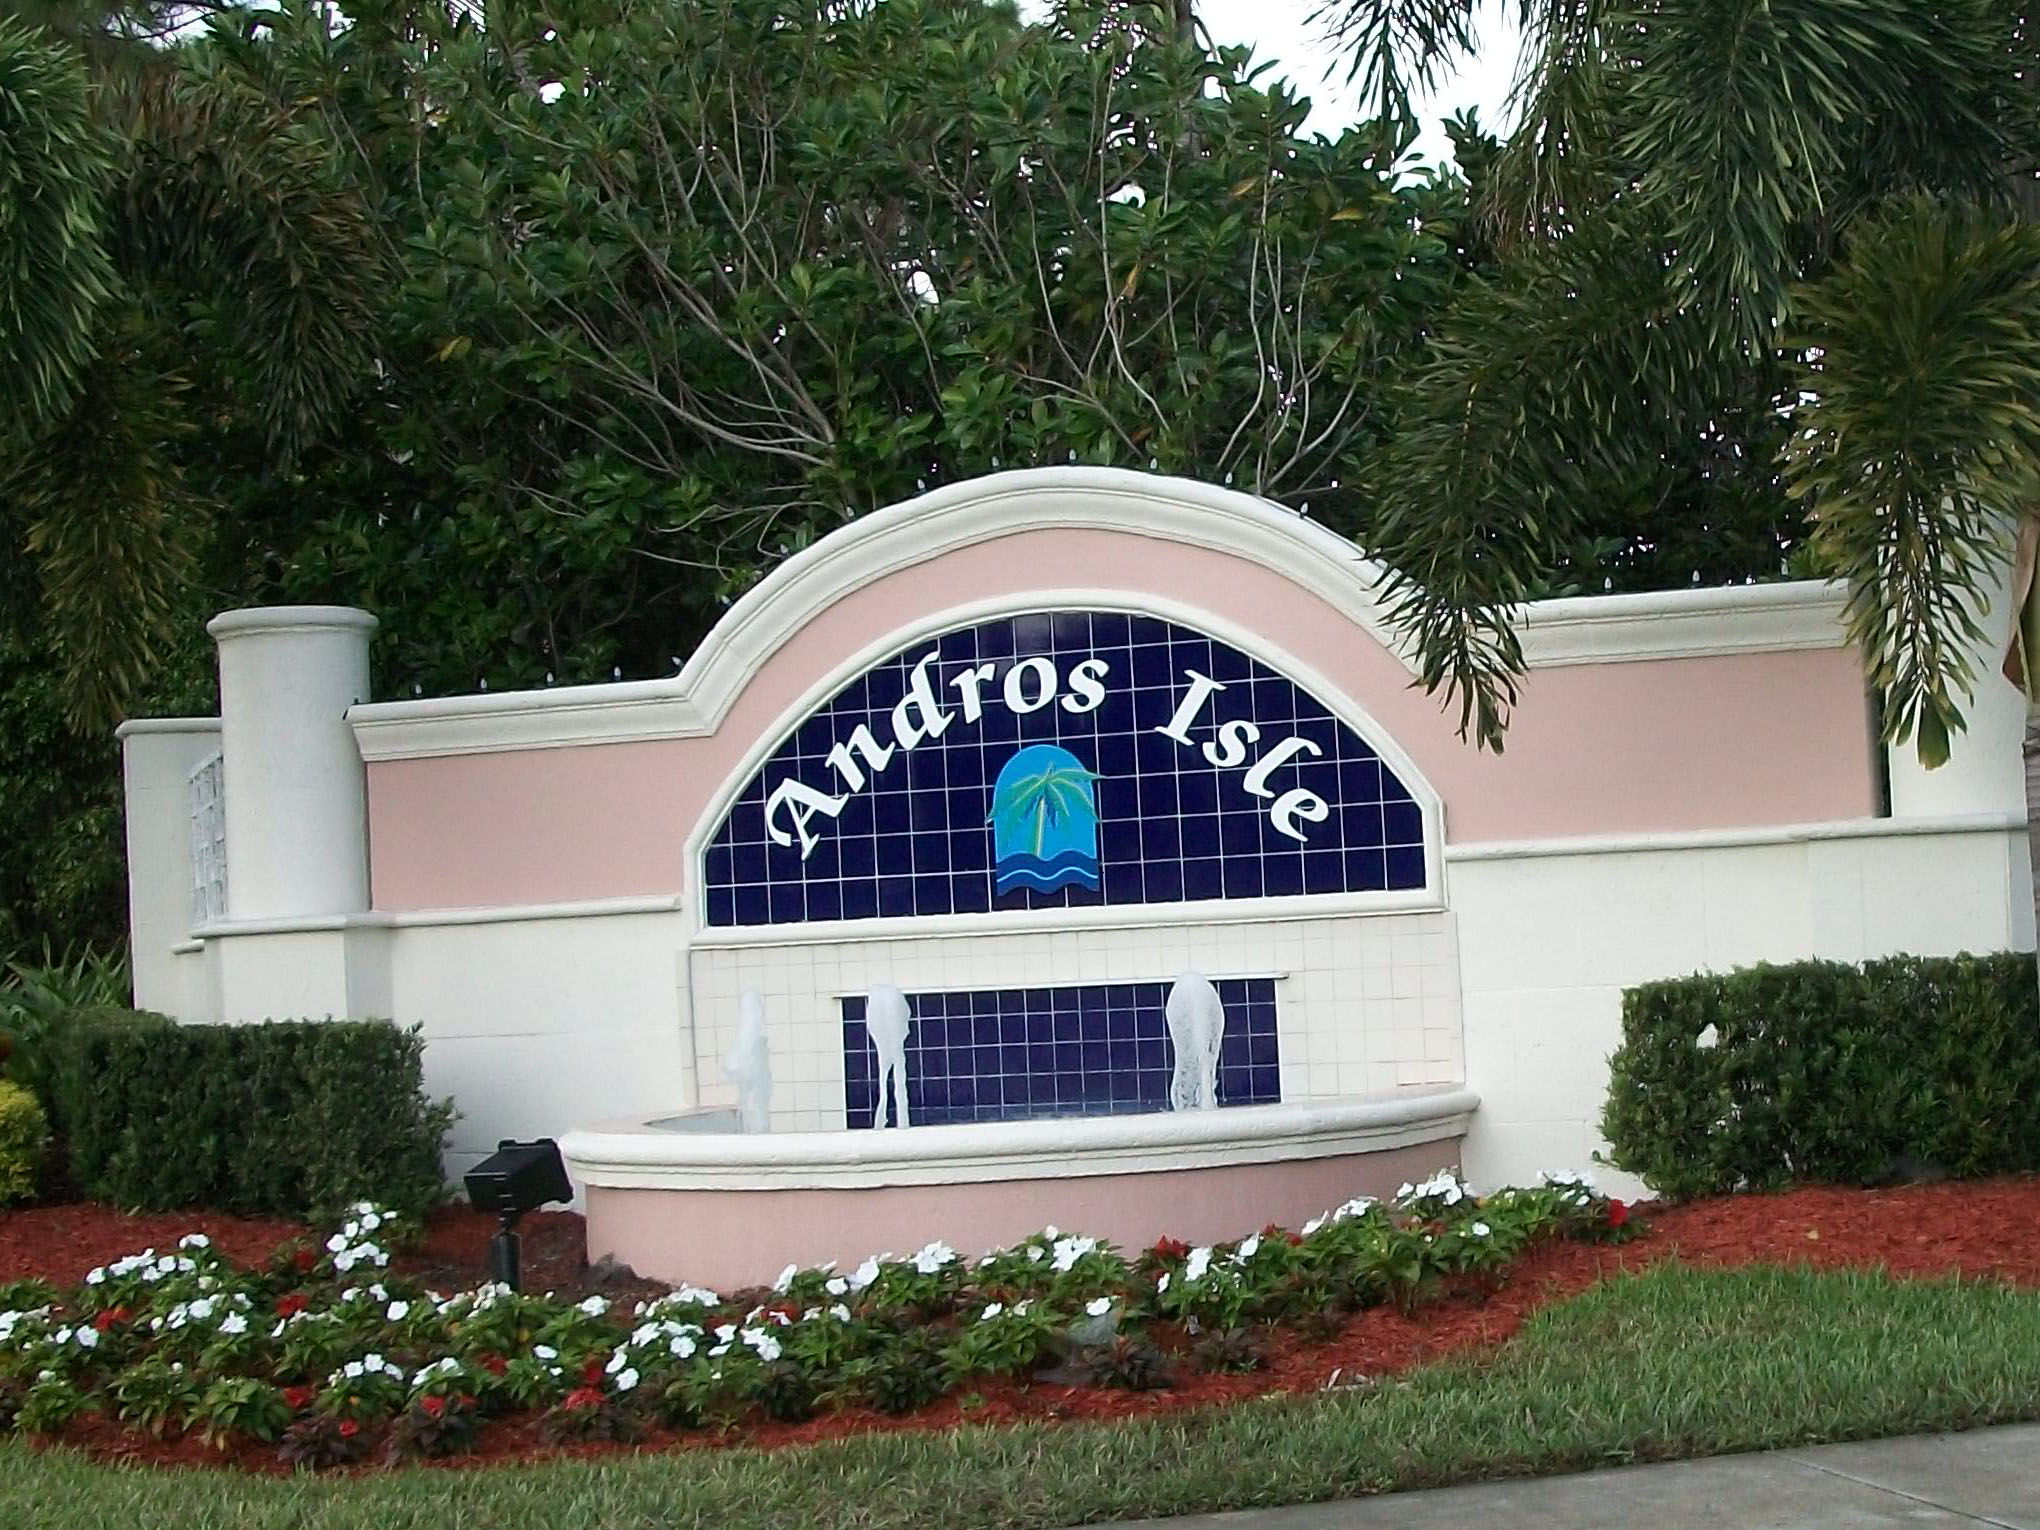 Andros Isle foreclosures in West Palm Beach